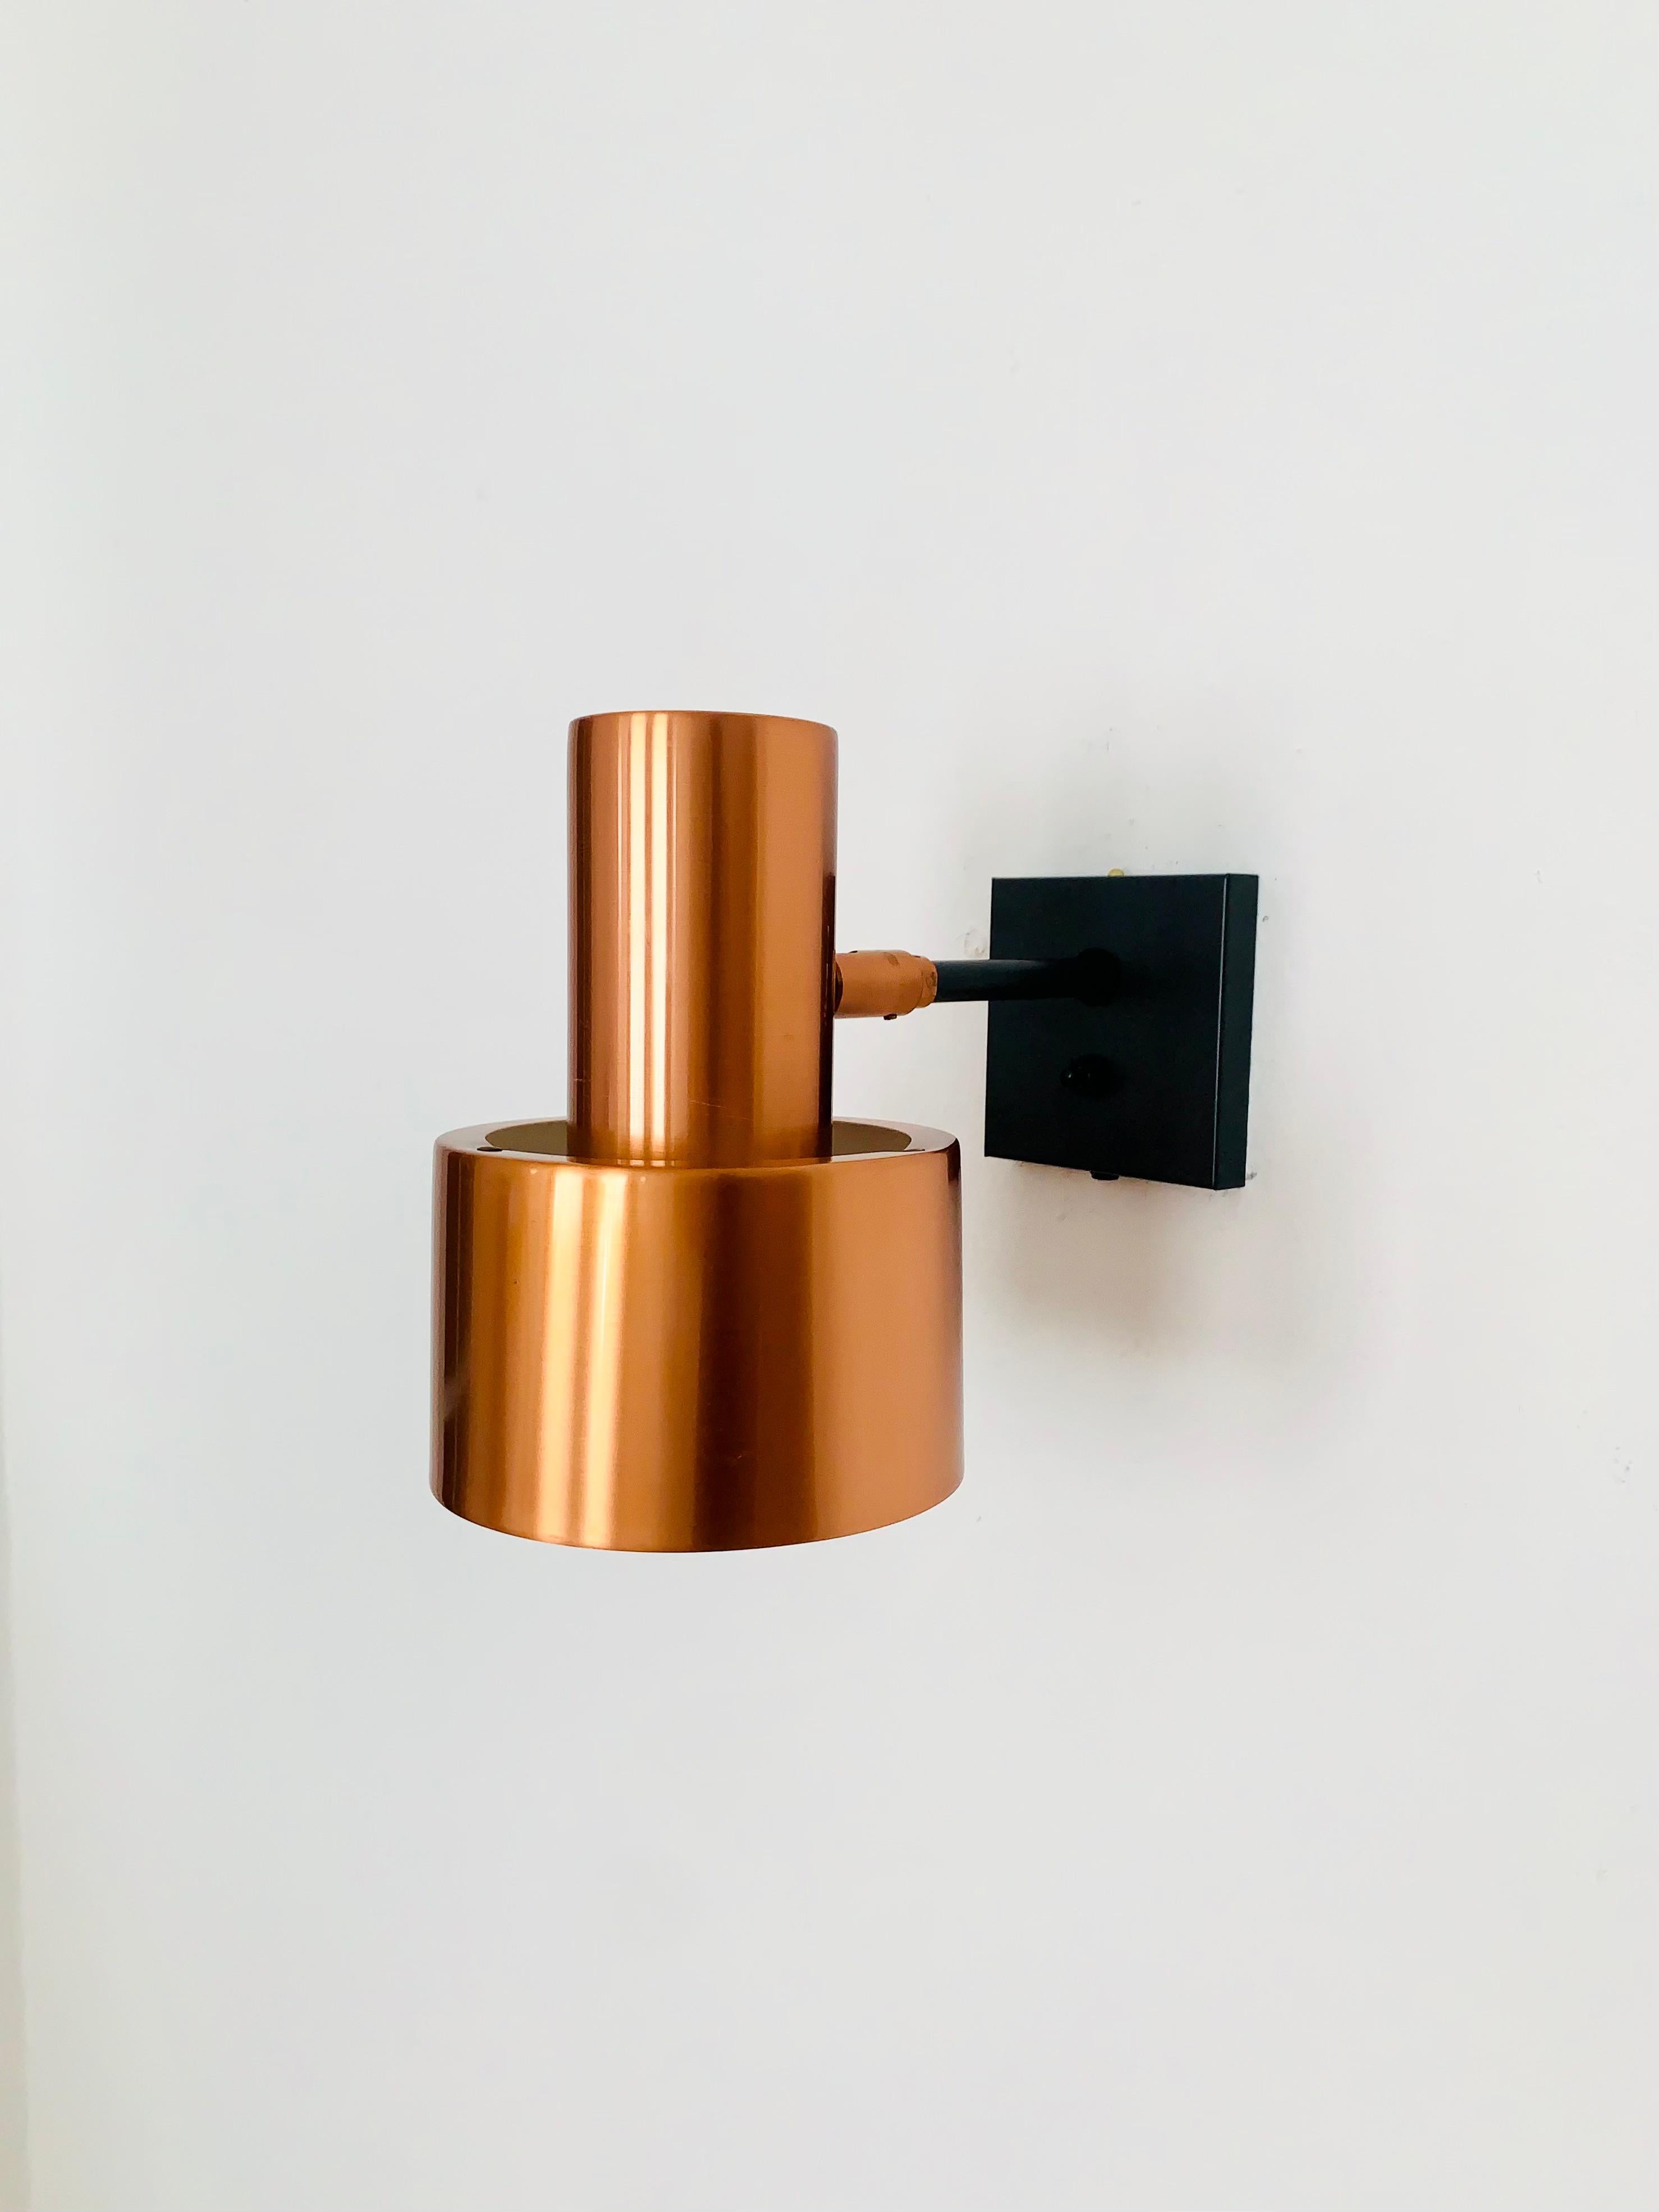 Very beautiful and impressive copper wall lamp from the 1960s.
Contemporary design and a highlight for every room.
A cozy light is created.

Manufacturer: Fog and Morup
Design: Jo Hammerborg

Condition:

Very good vintage condition with slight signs